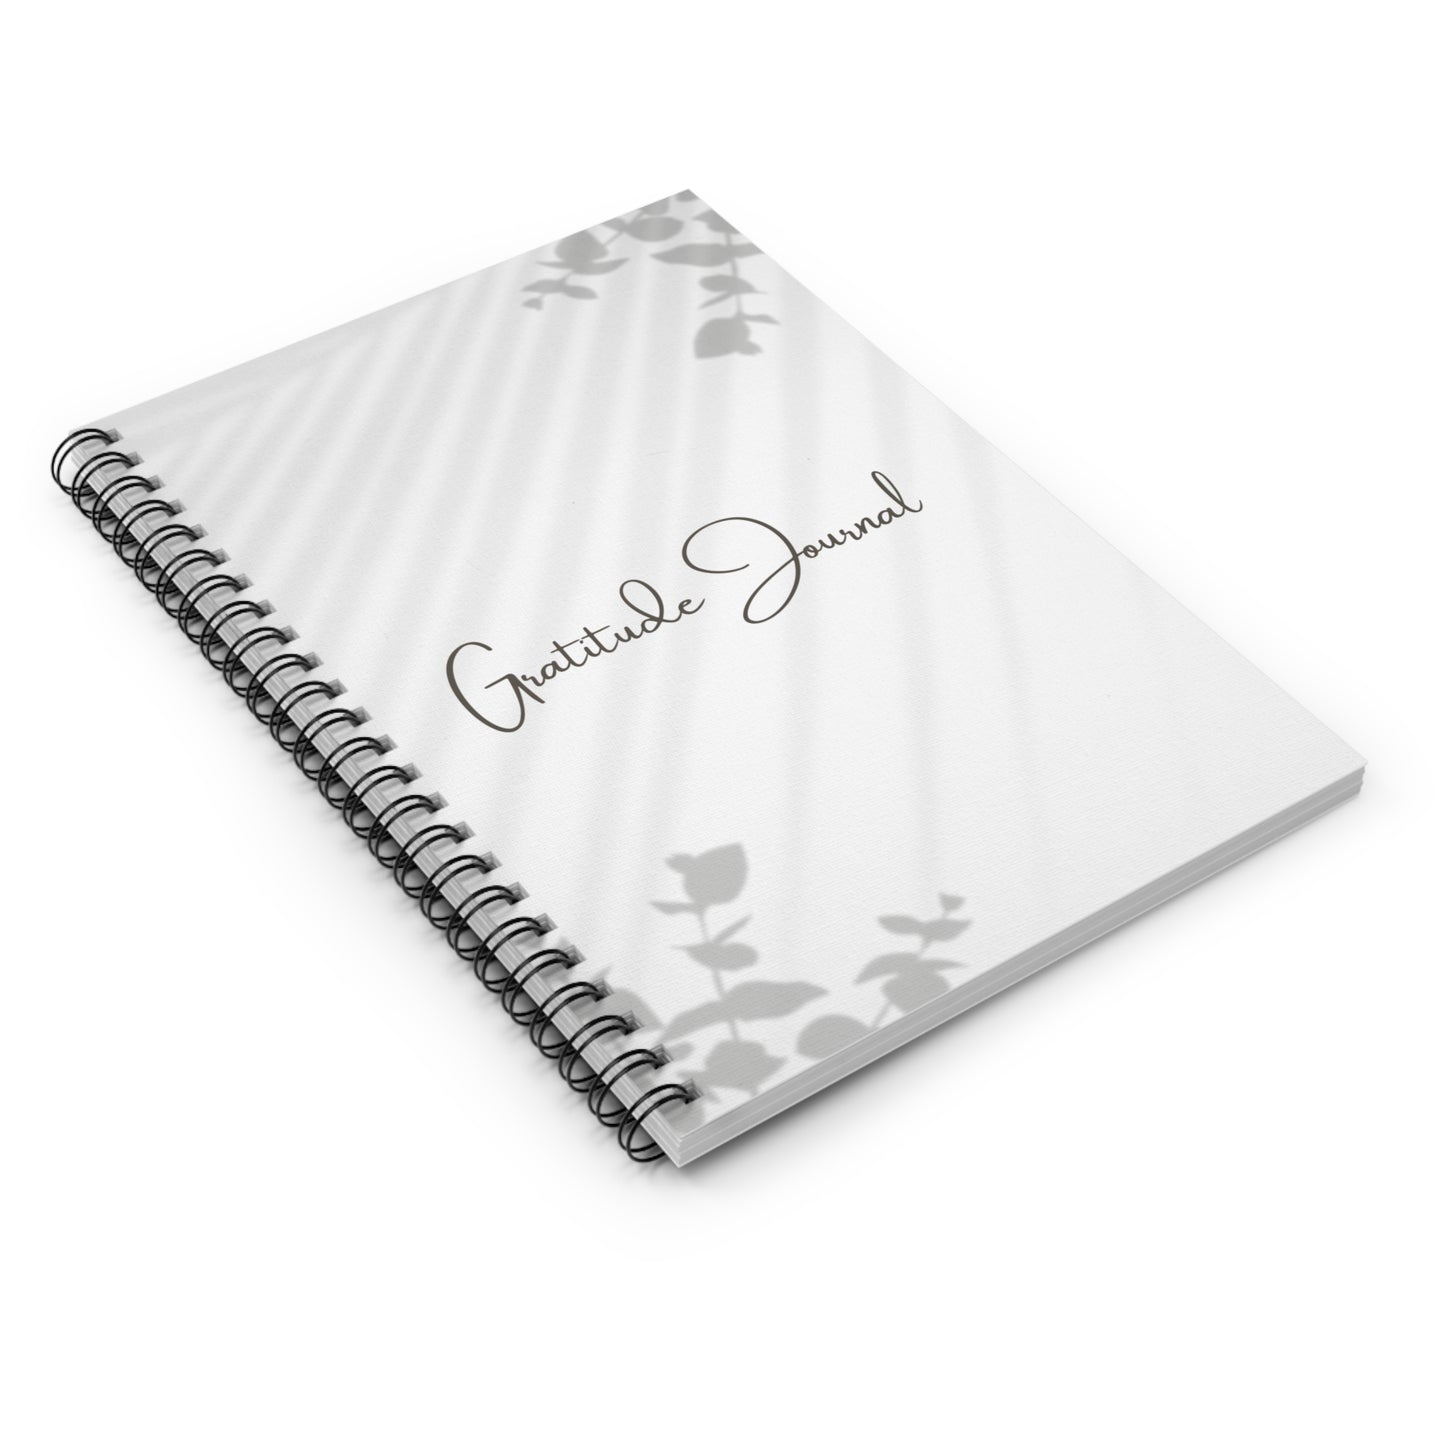 "Embrace Gratitude: Daily Reflections" Spiral Notebook